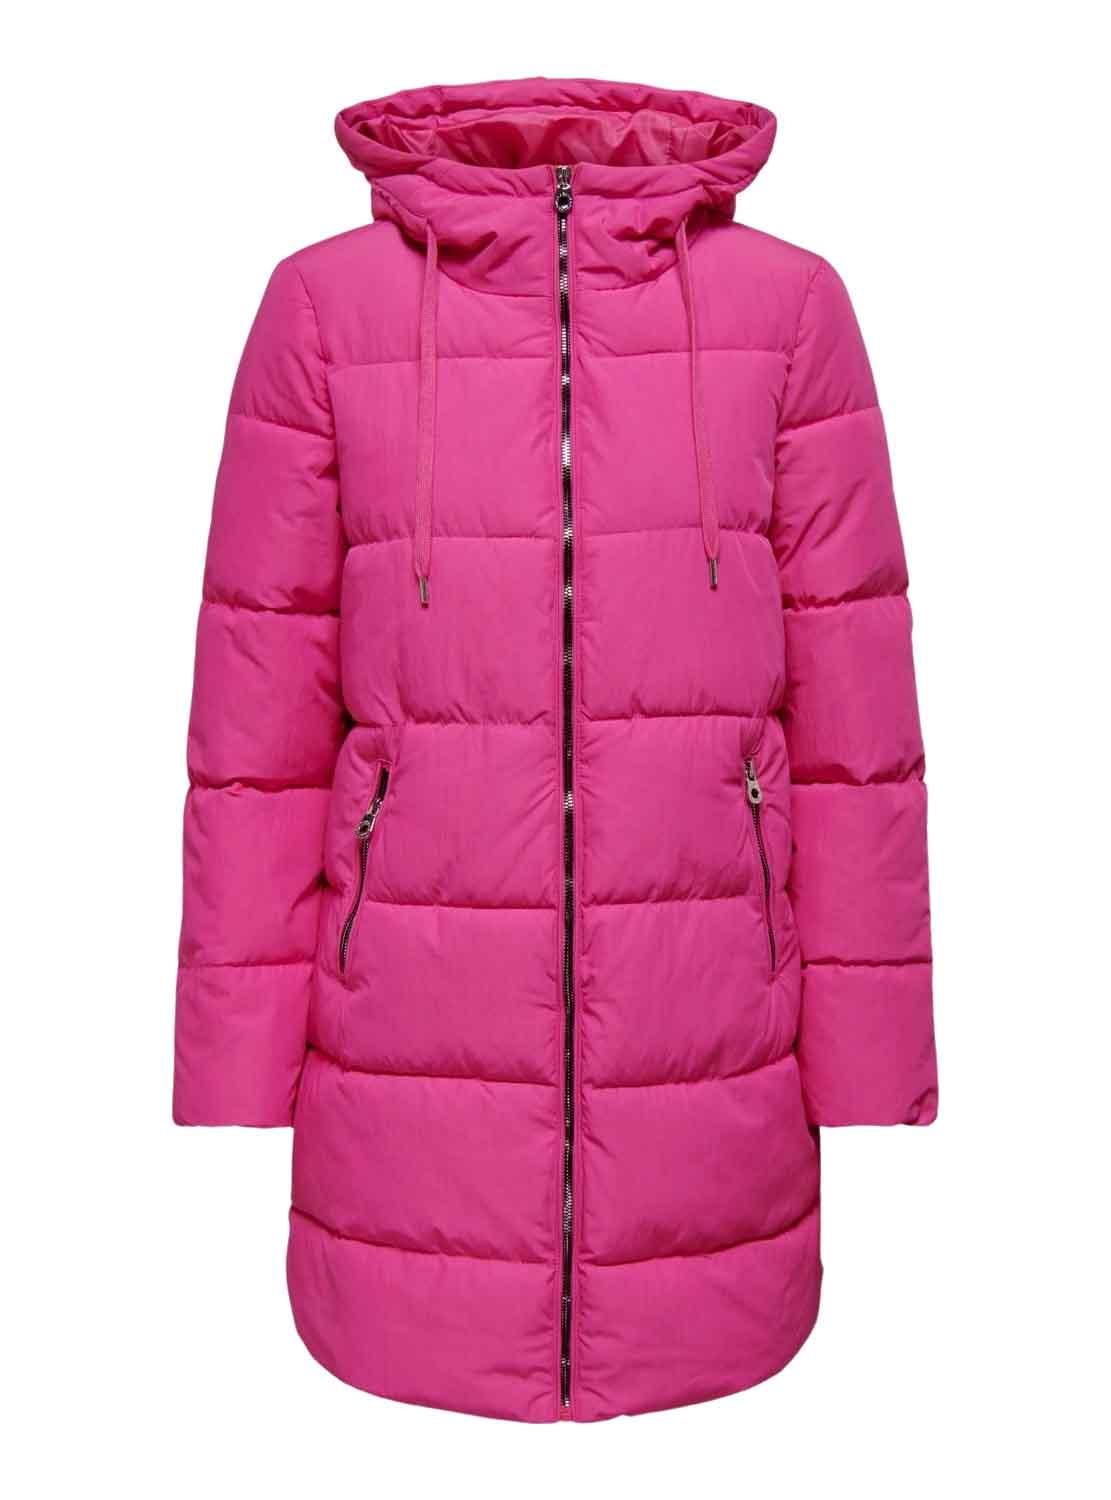 Giacca Only Carrello Long Puffer Rosa per Donna